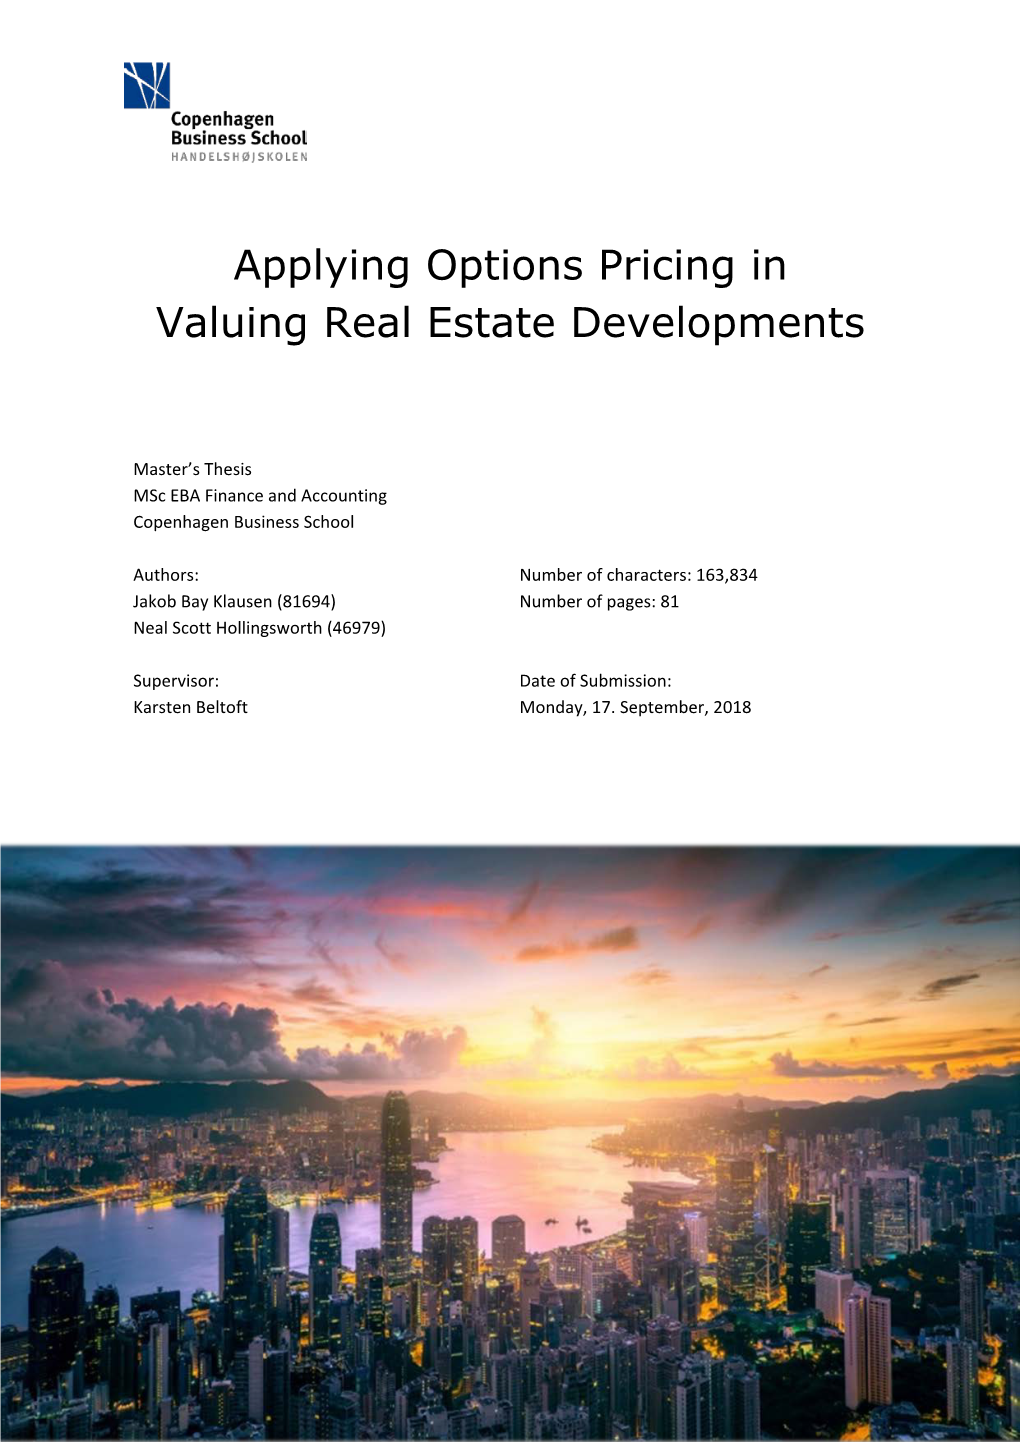 Applying Options Pricing in Valuing Real Estate Developments